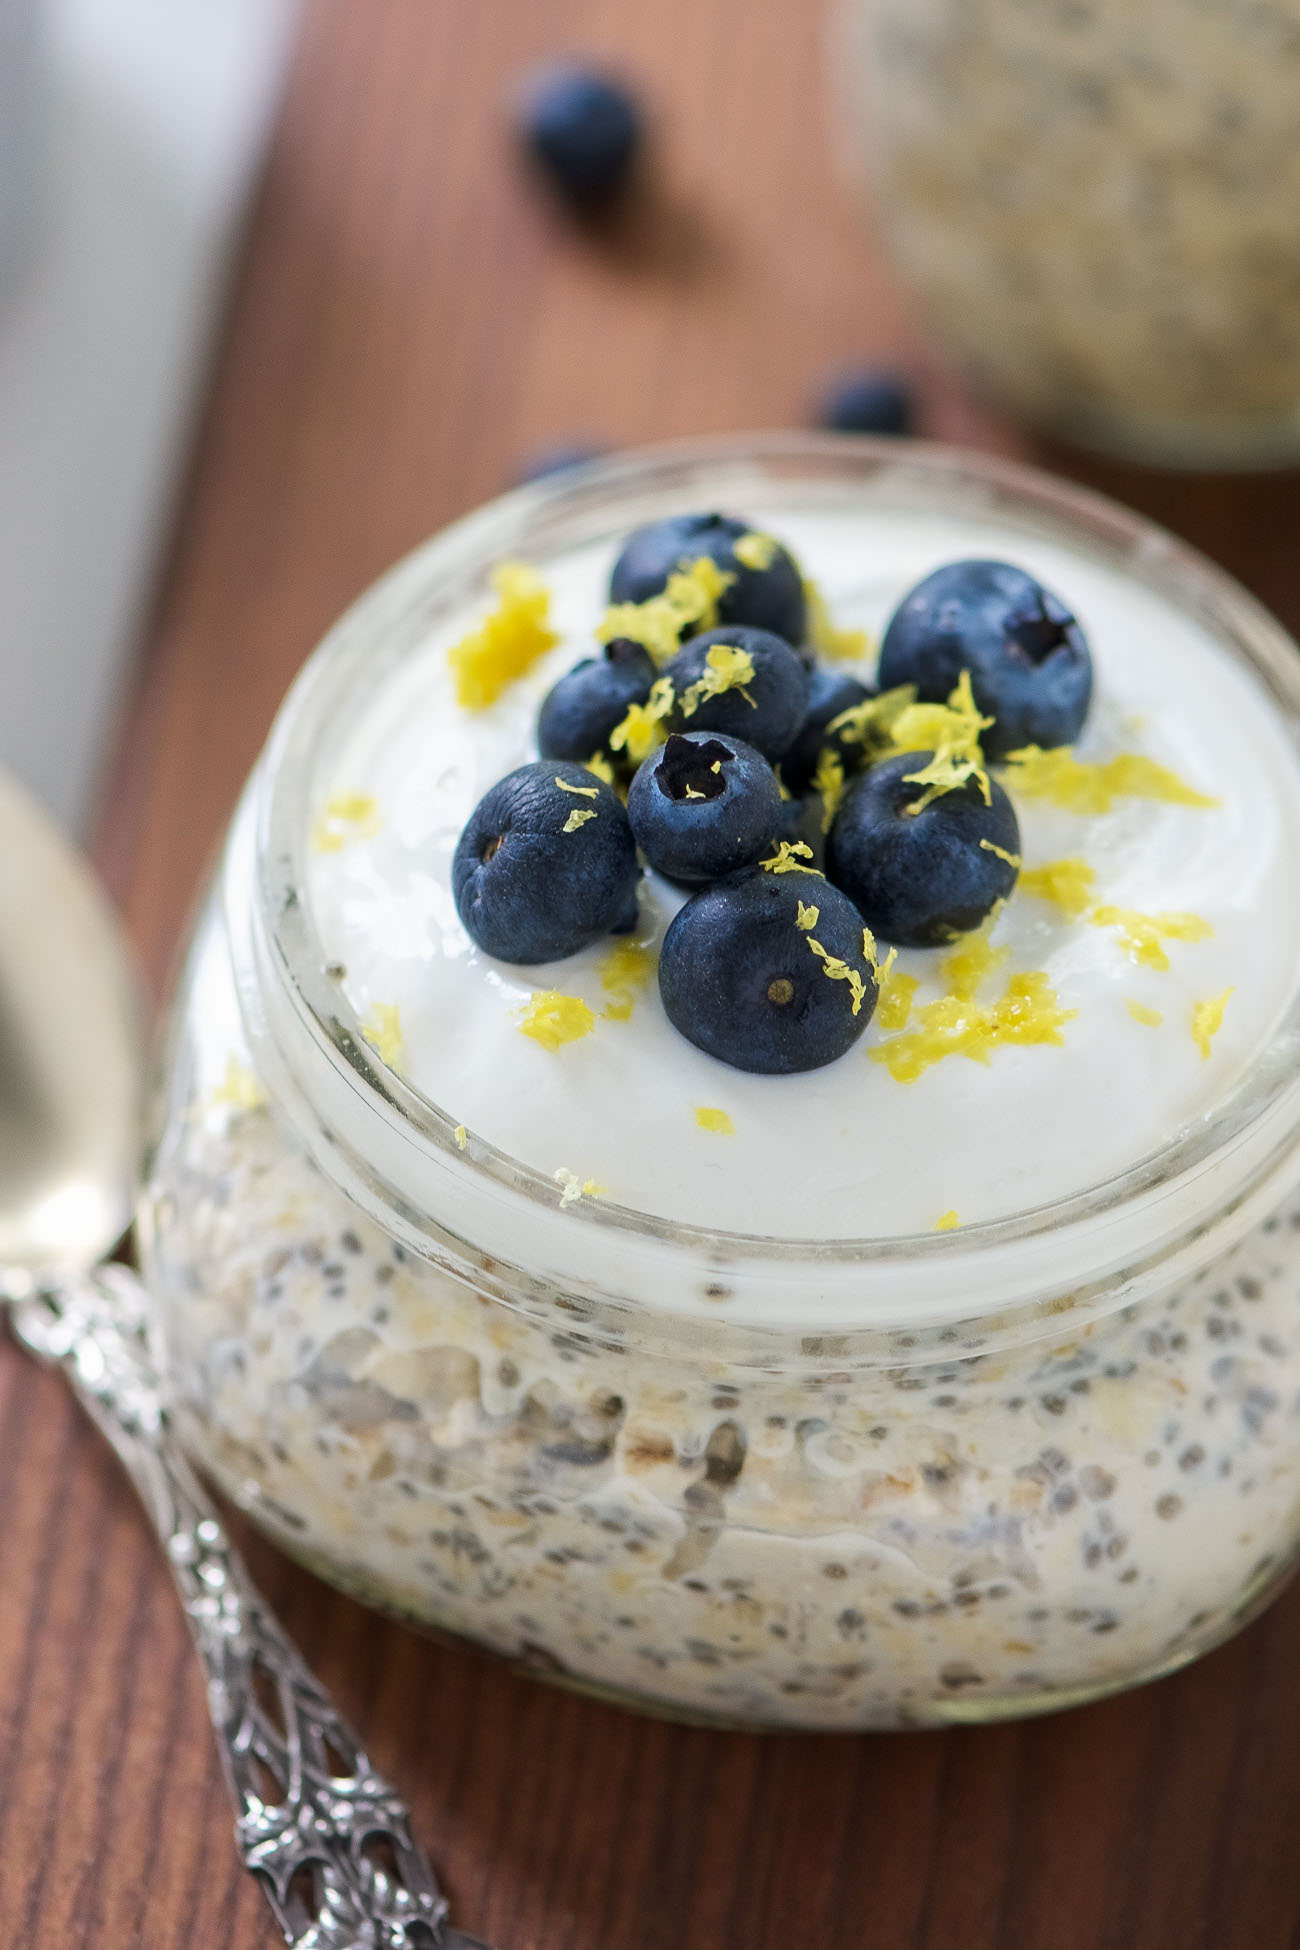 Blueberry Lemon Cheesecake Overnight Oats make breakfast simple! Cheesecake flavored overnight oats bursting with lemon and blueberries, all come together in a protein packed, make ahead breakfast!